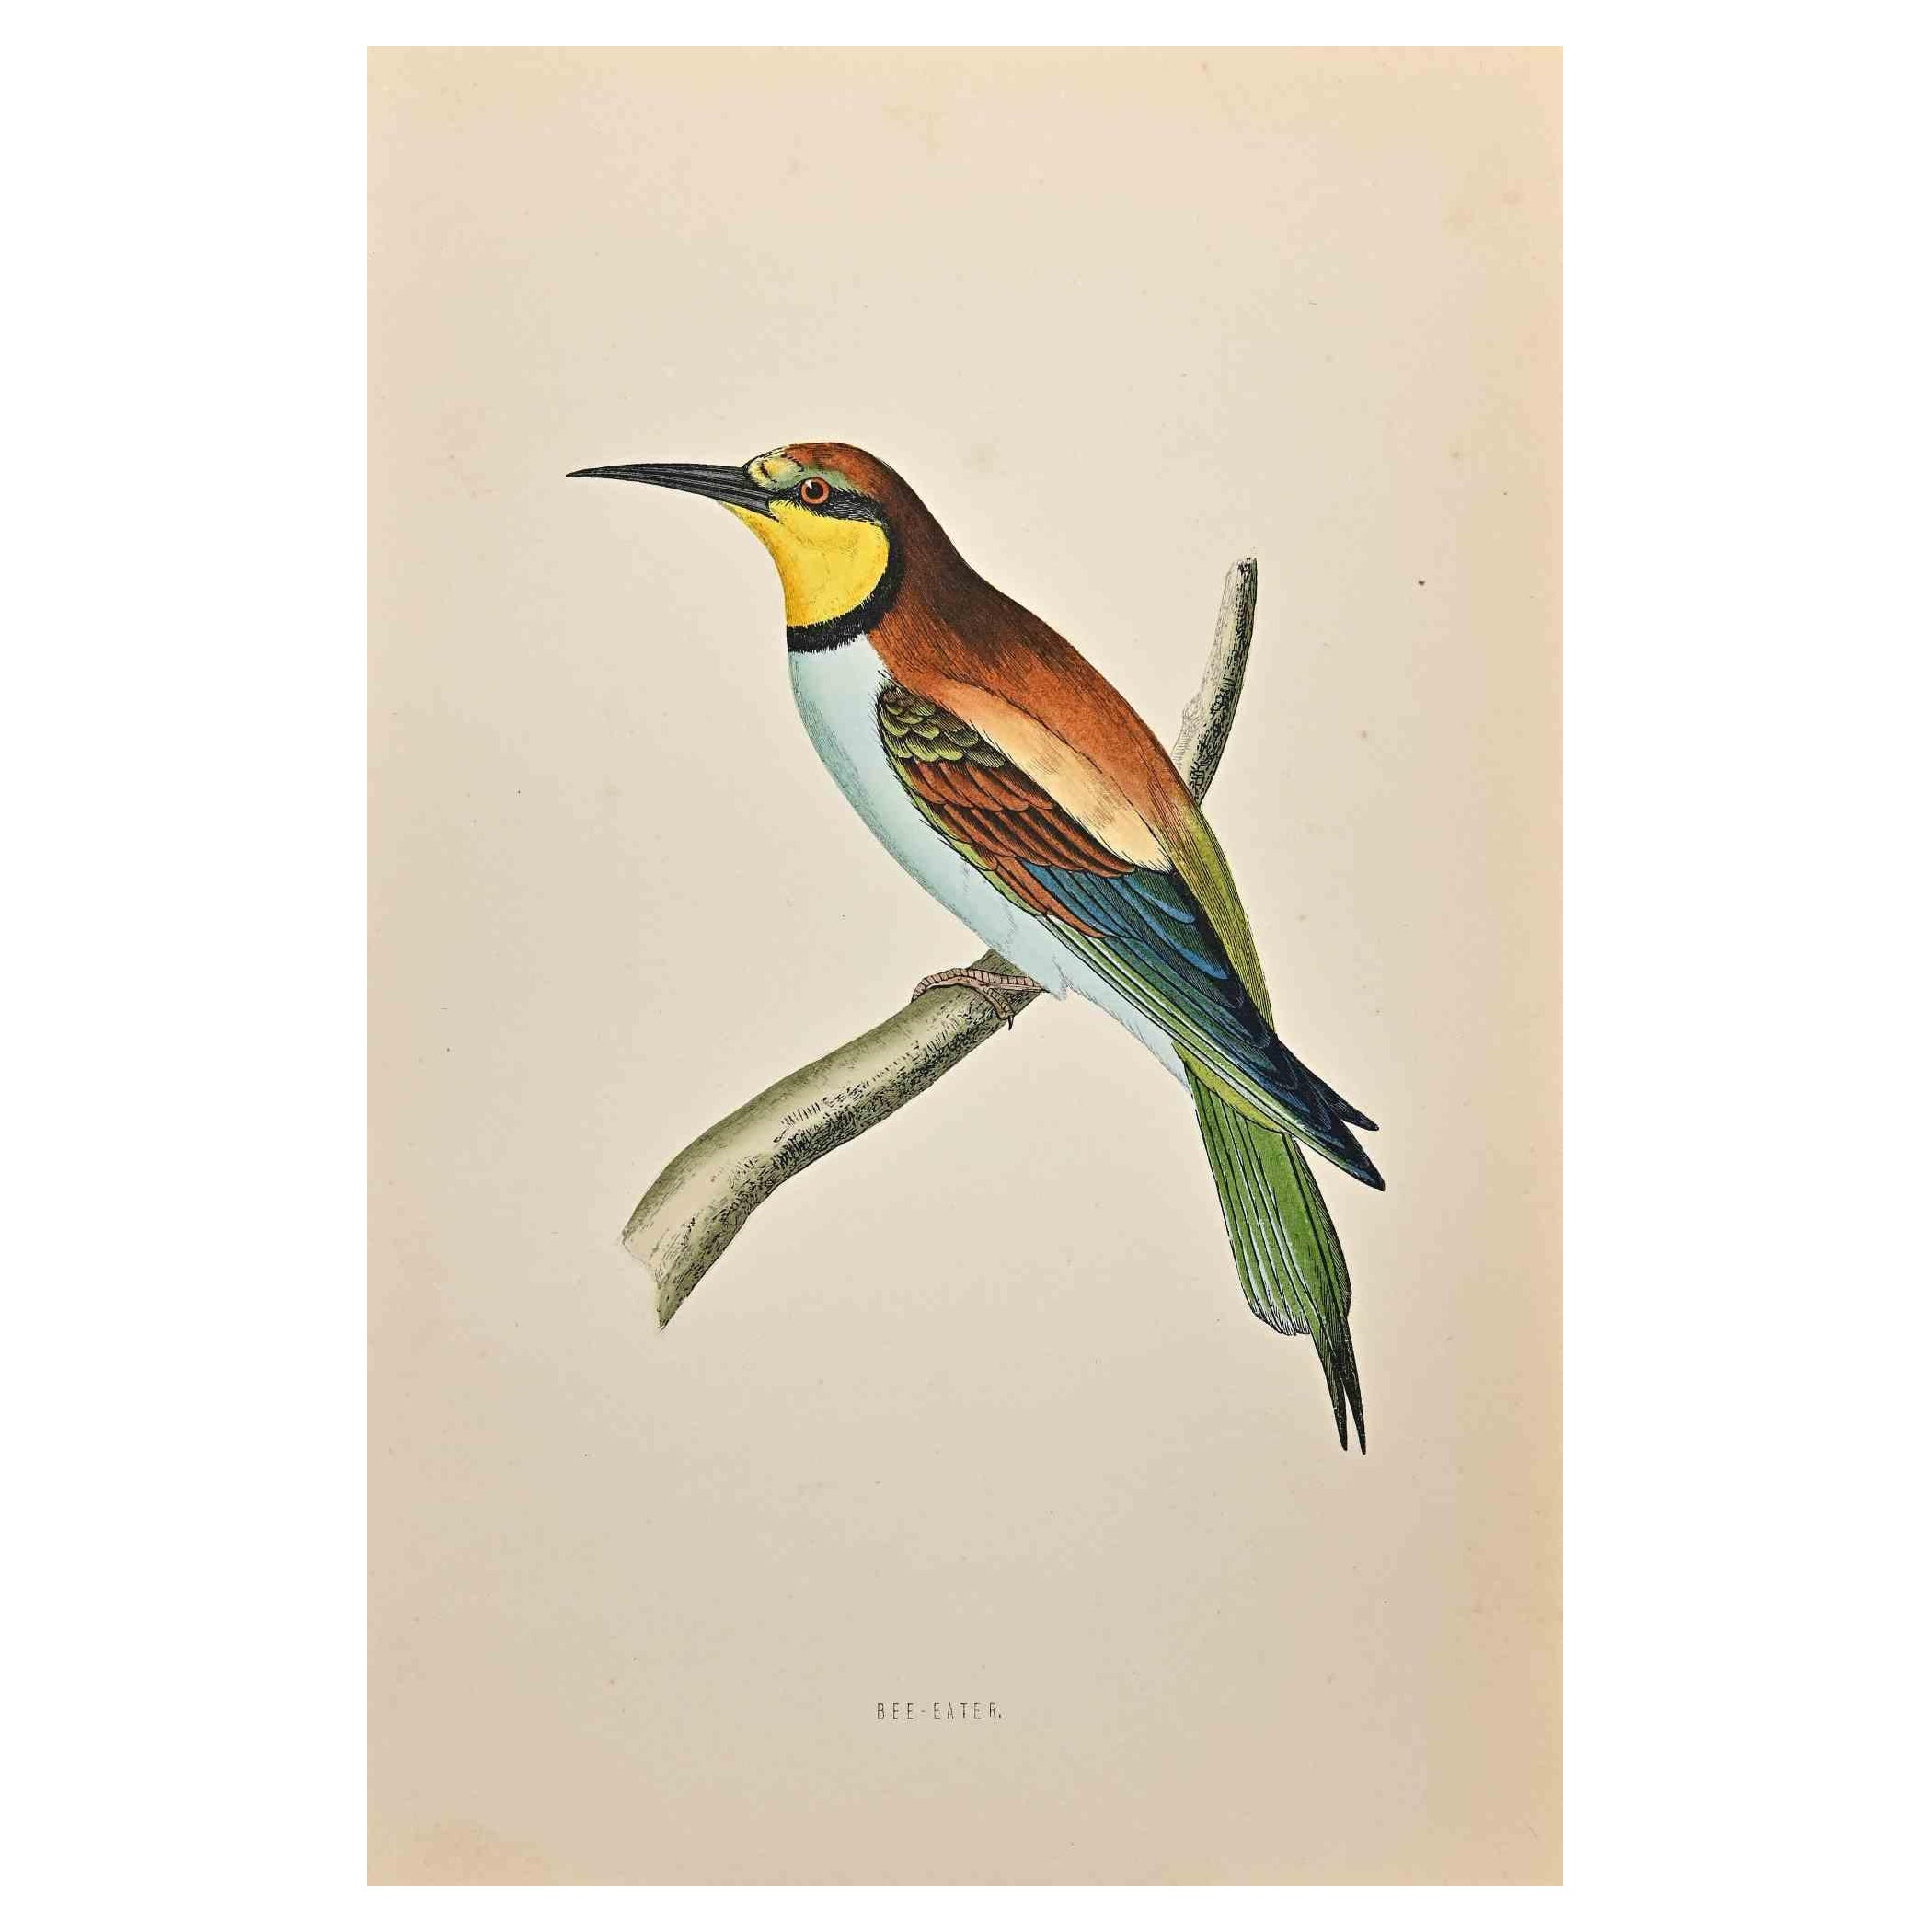 Bee-Eater is a modern artwork realized in 1870 by the British artist Alexander Francis Lydon (1836-1917).

Woodcut print on ivory-colored paper.

Hand-colored, published by London, Bell & Sons, 1870.  

The name of the bird is printed on the plate.